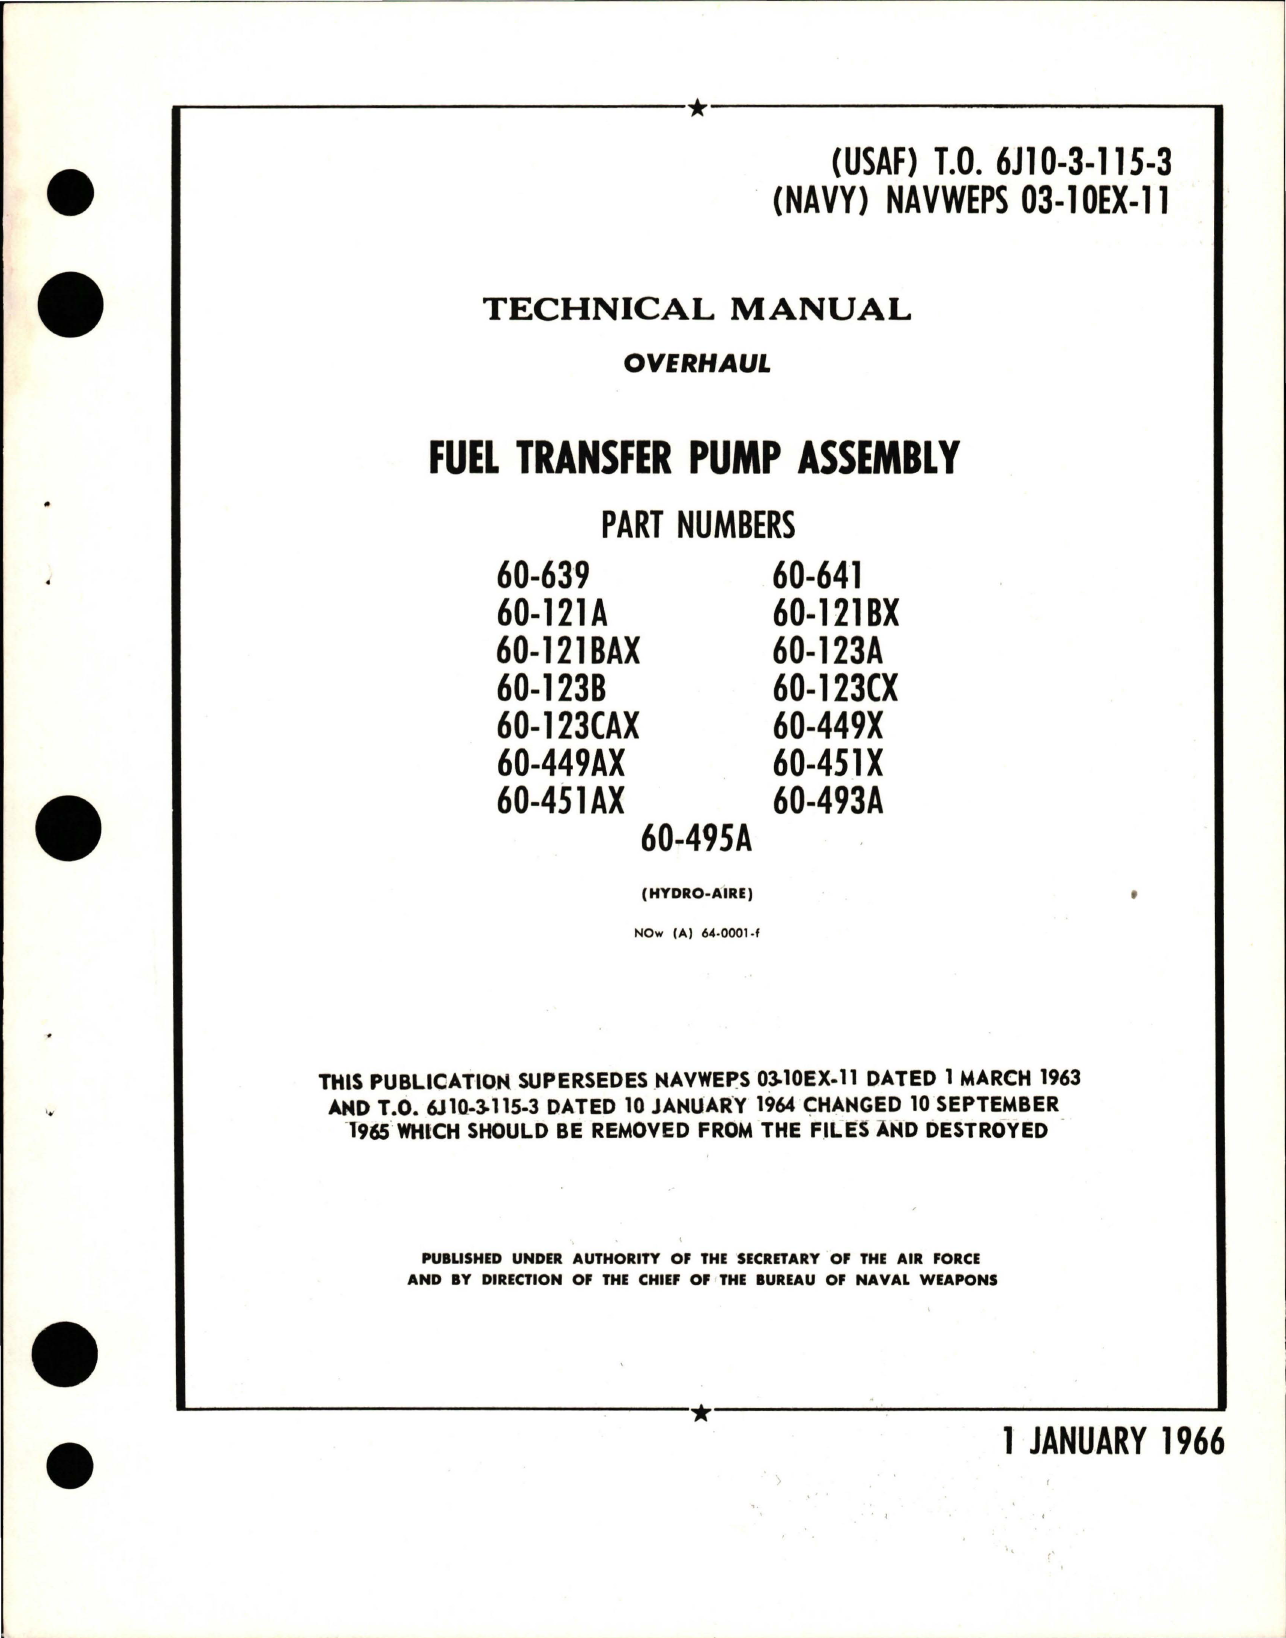 Sample page 1 from AirCorps Library document: Overhaul for Fuel Transfer Pump Assembly